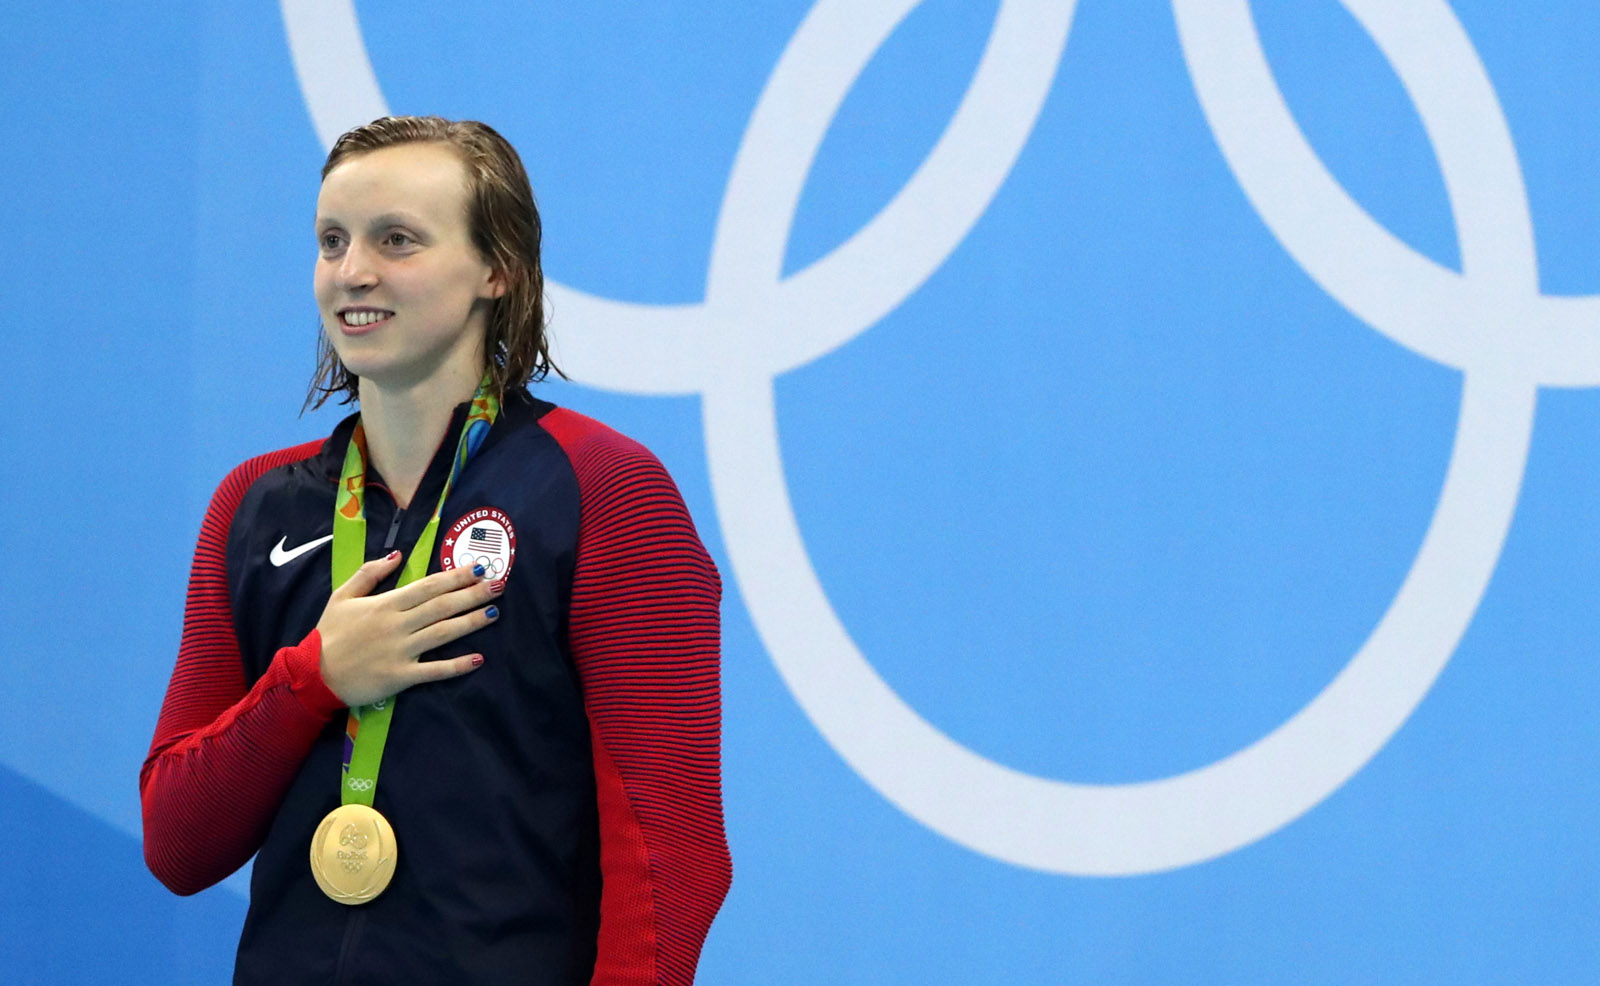 United States' Katie Ledecky listens to the national anthem after winning gold in the women's 200-meter freestyle during the swimming competitions at the 2016 Summer Olympics, Tuesday, Aug. 9, 2016, in Rio de Janeiro, Brazil. (AP Photo/Lee Jin-man)